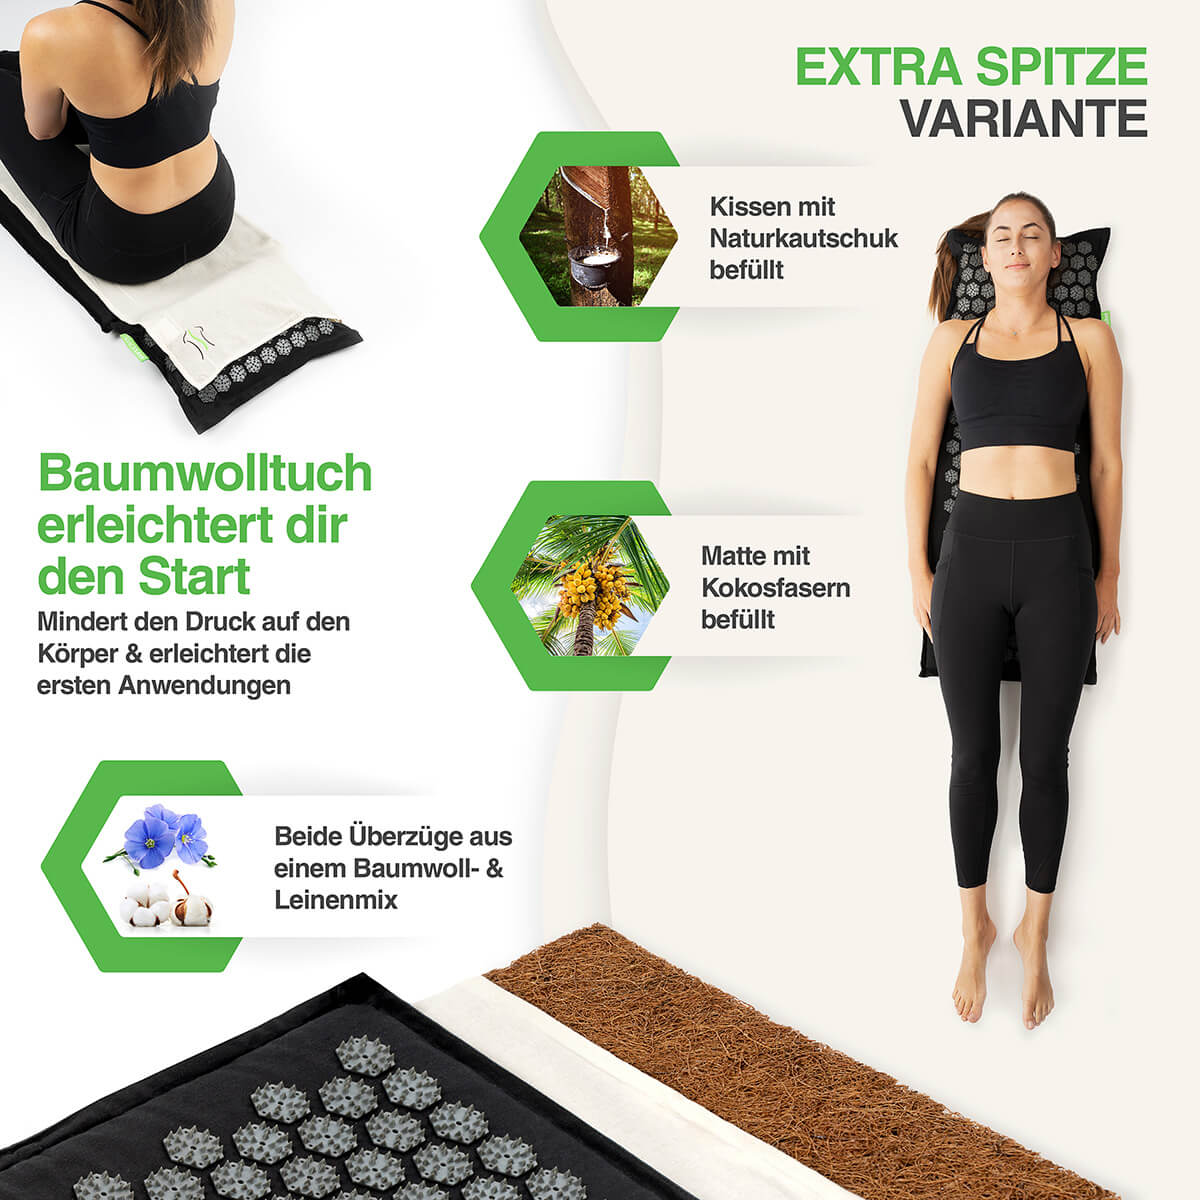 BACKLAxx® Acupressure Mat online for less - BACKLAxx® Shop